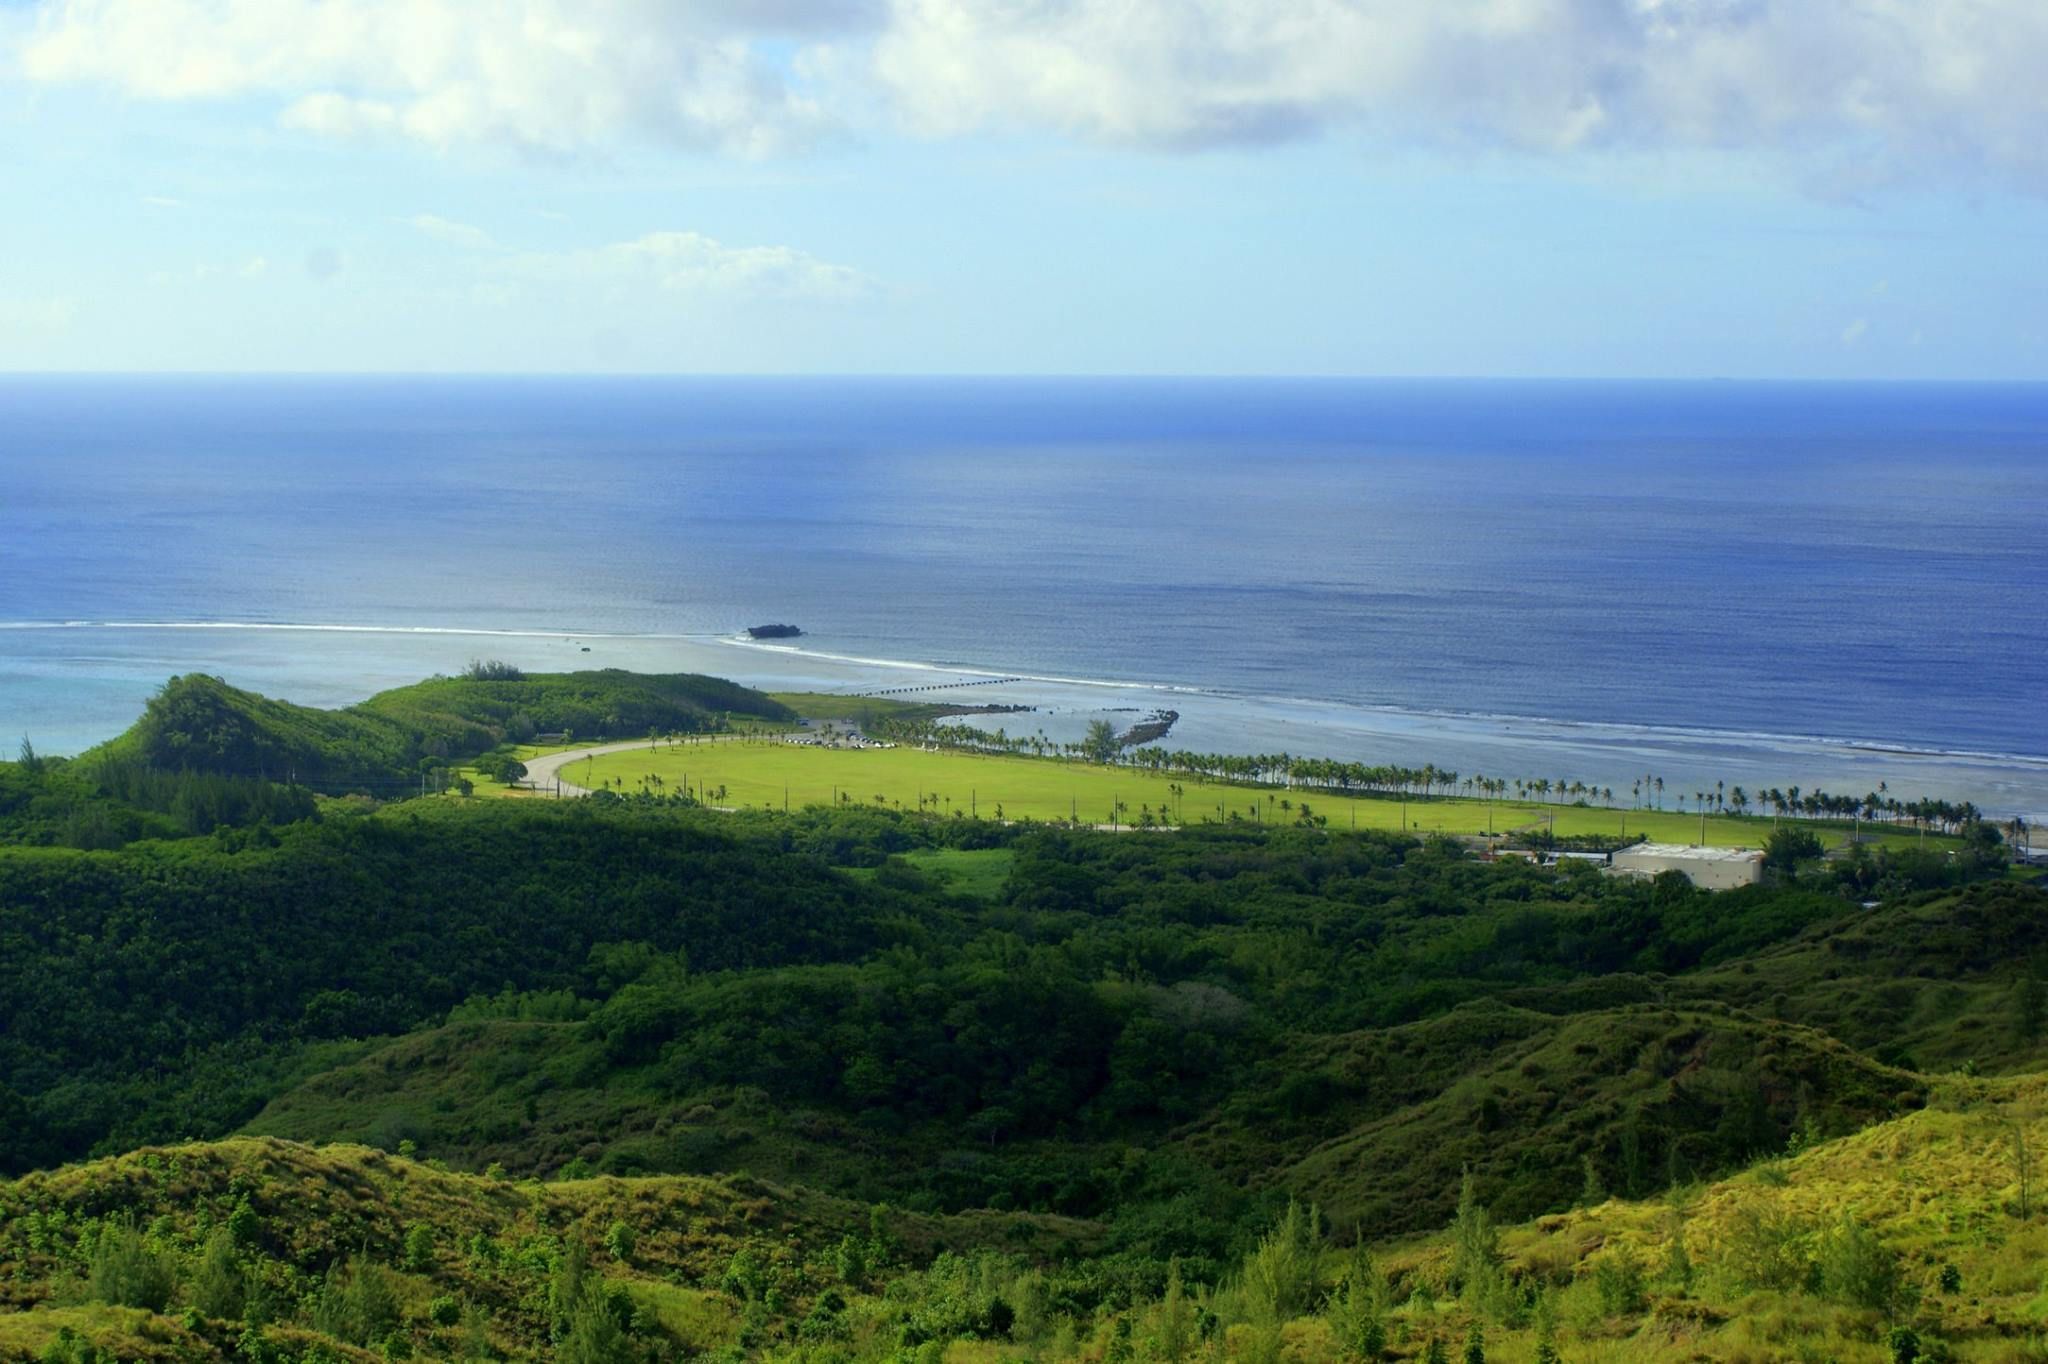 Overlooking the invasion Asan Beach, this overlook honors the men and women killed on Guam in World War II.